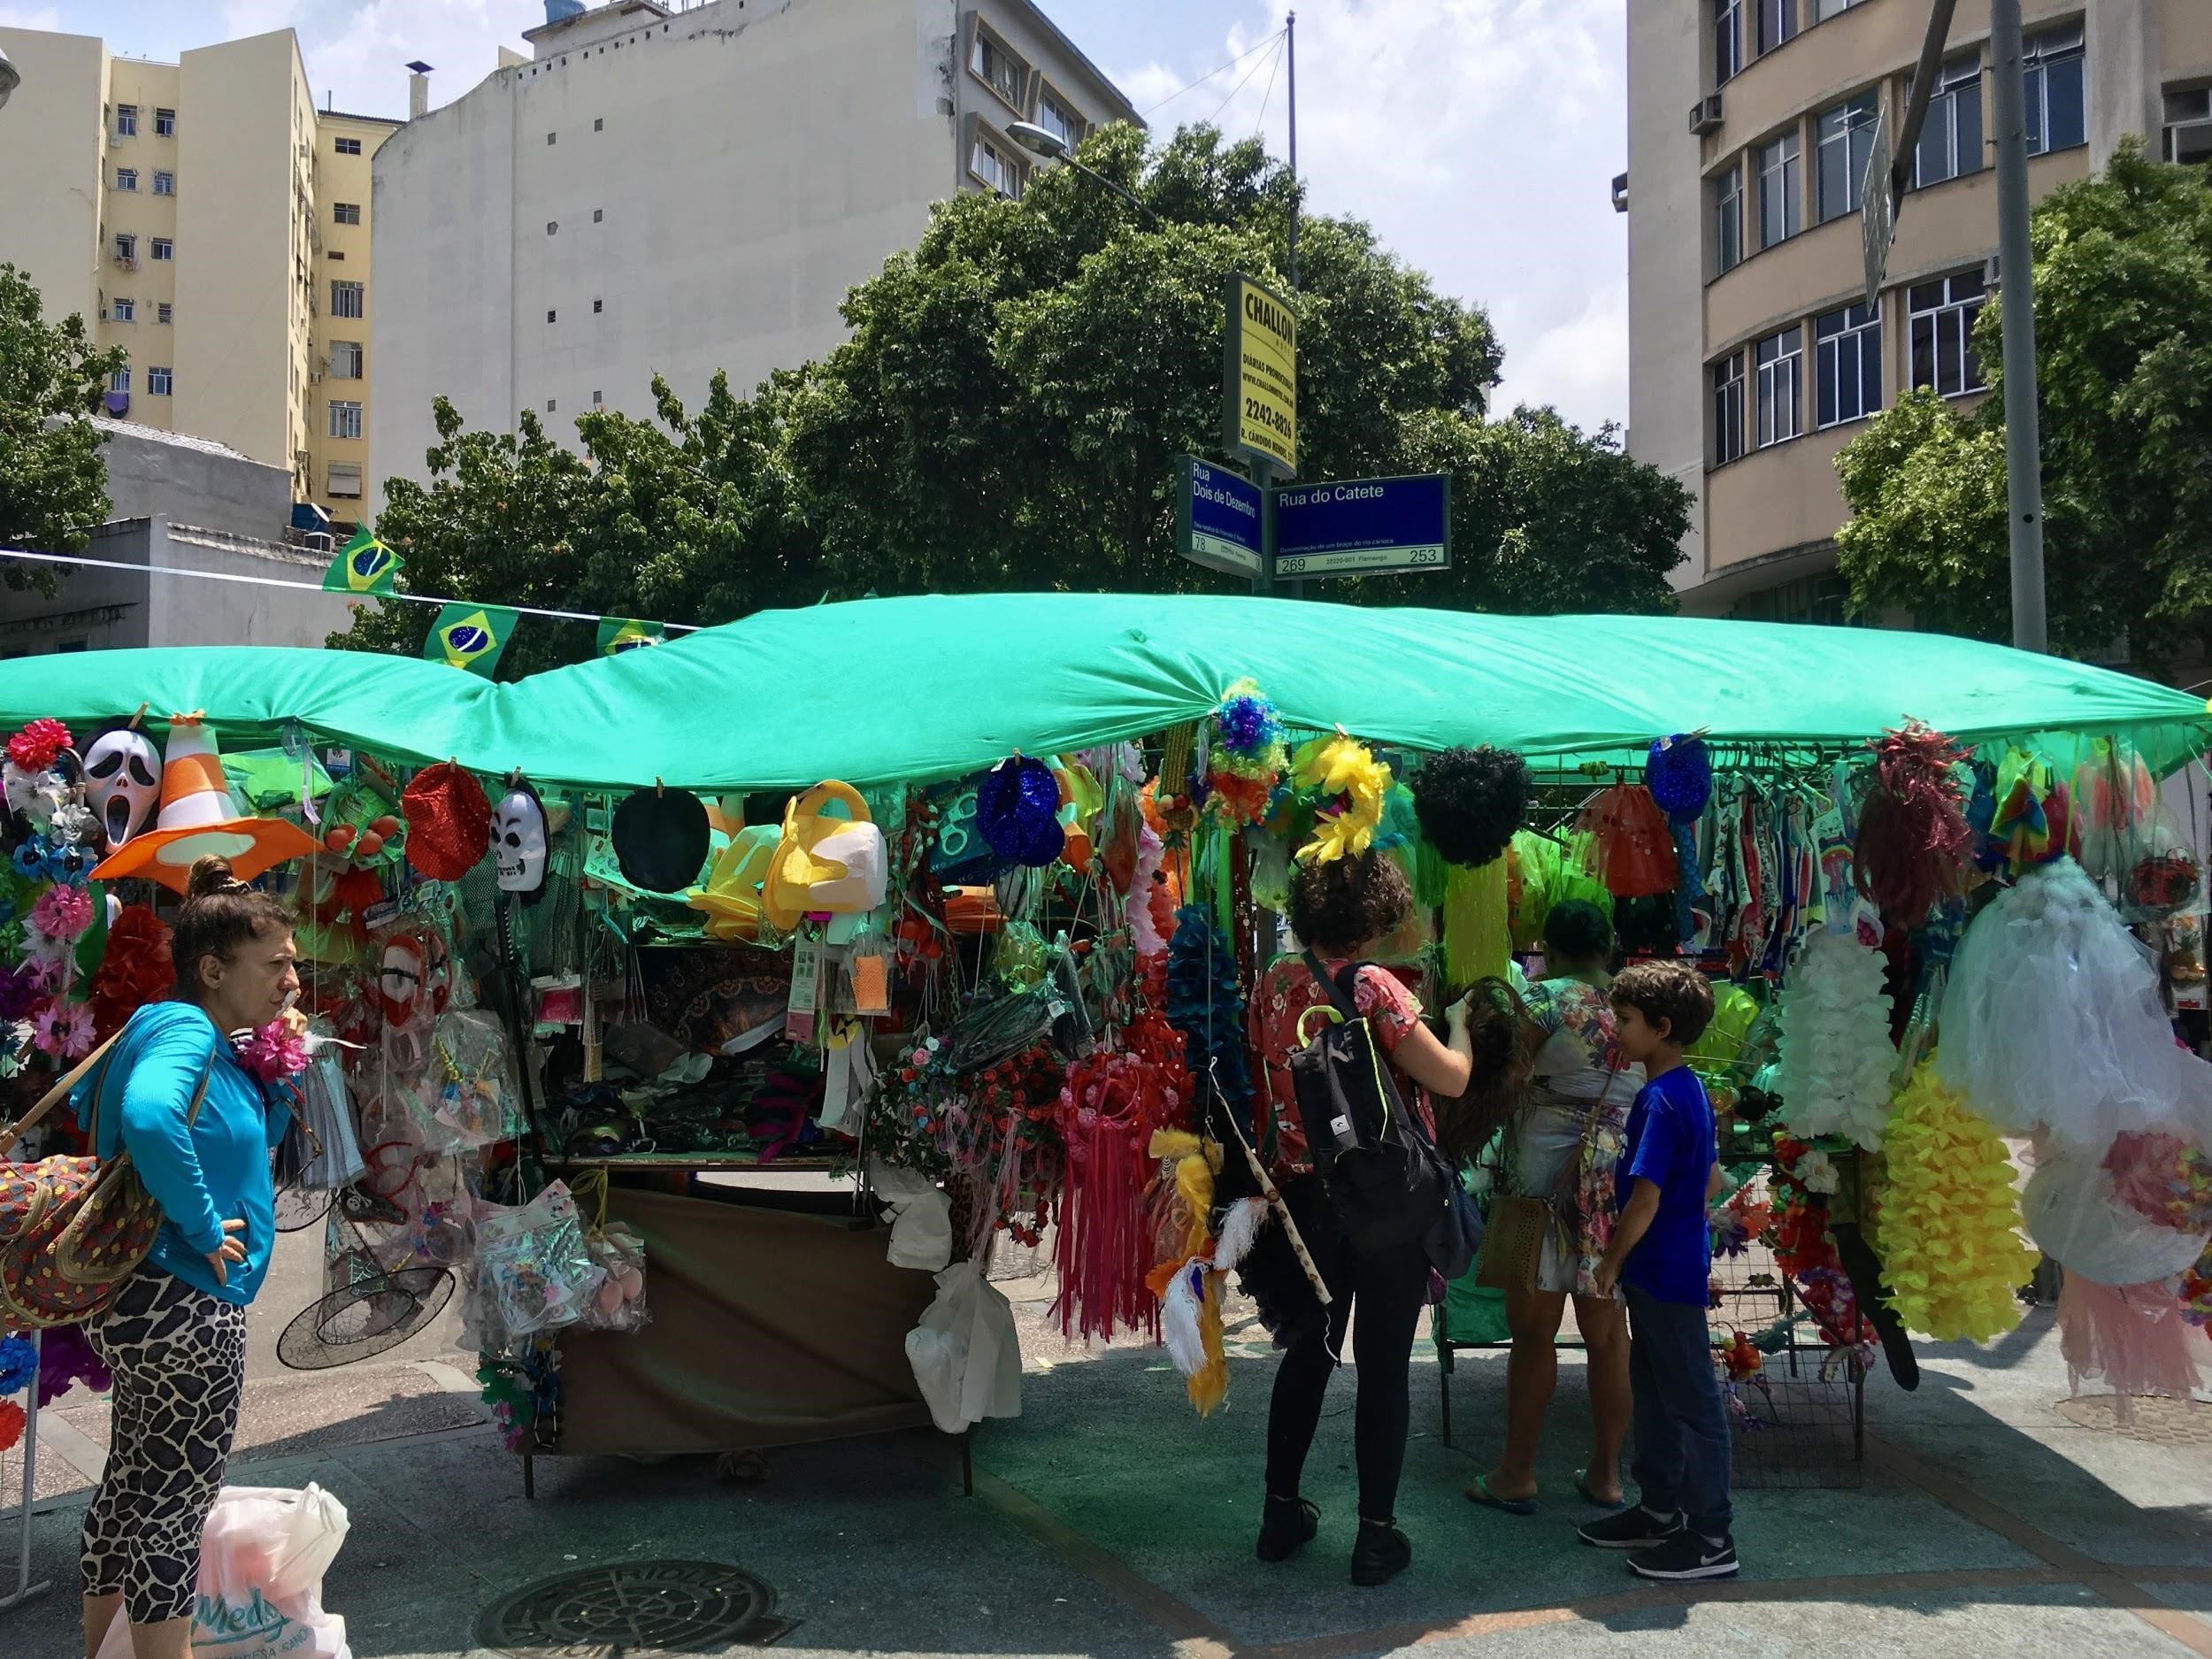 Street vendors selling costume items, such as colorful tutus, pirate hats, and bunny ears